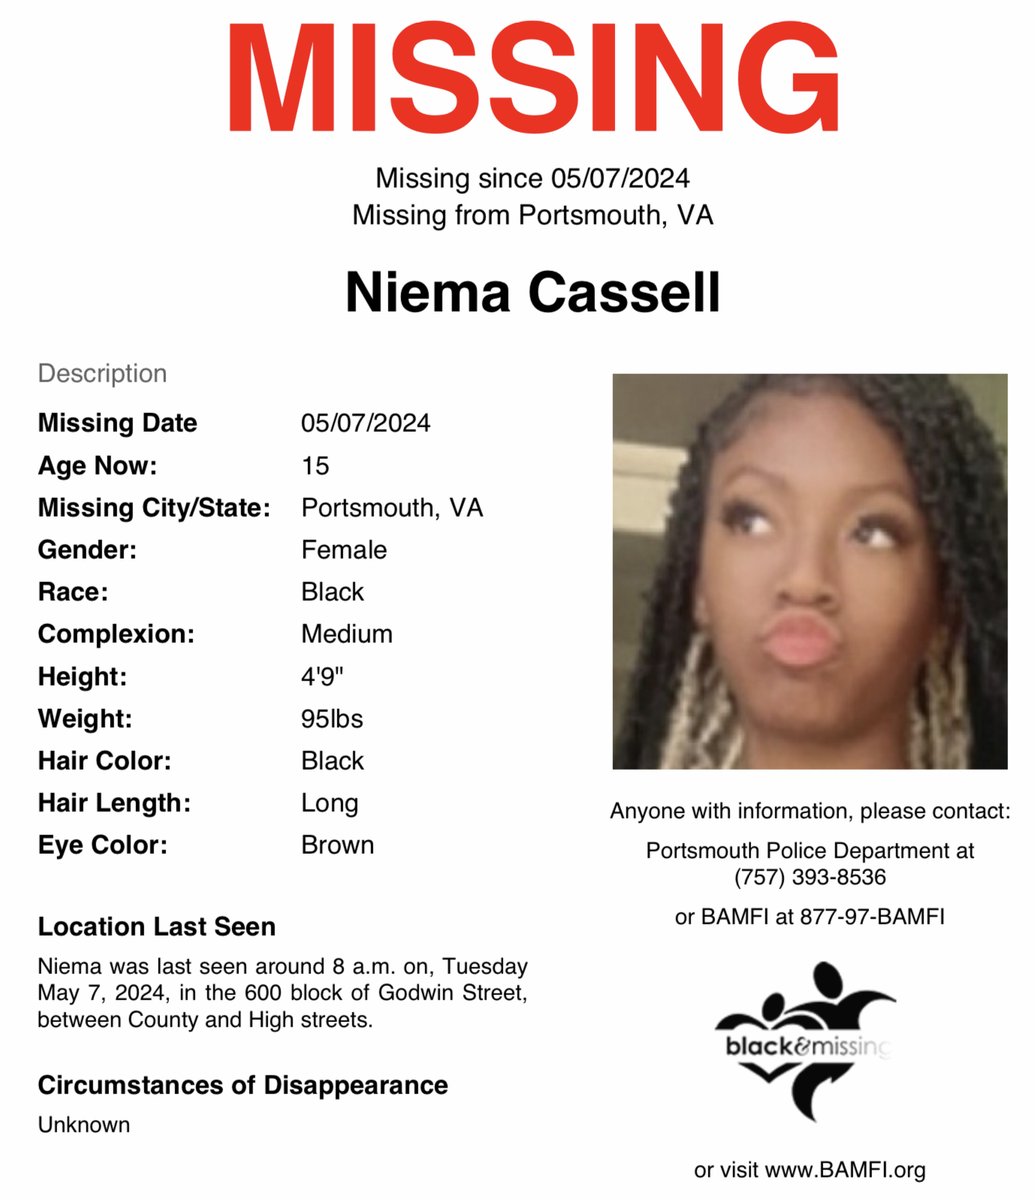 #Portsmouth, #Virginia: 15y/o Niema Cassell may have been abducted, police say Niema was last seen around 8 a.m. yesterday (May 7) in the 600 block of Godwin Street, between County and High streets. Pls SHARE to #HelpUsFindNiema #NiemaCassell